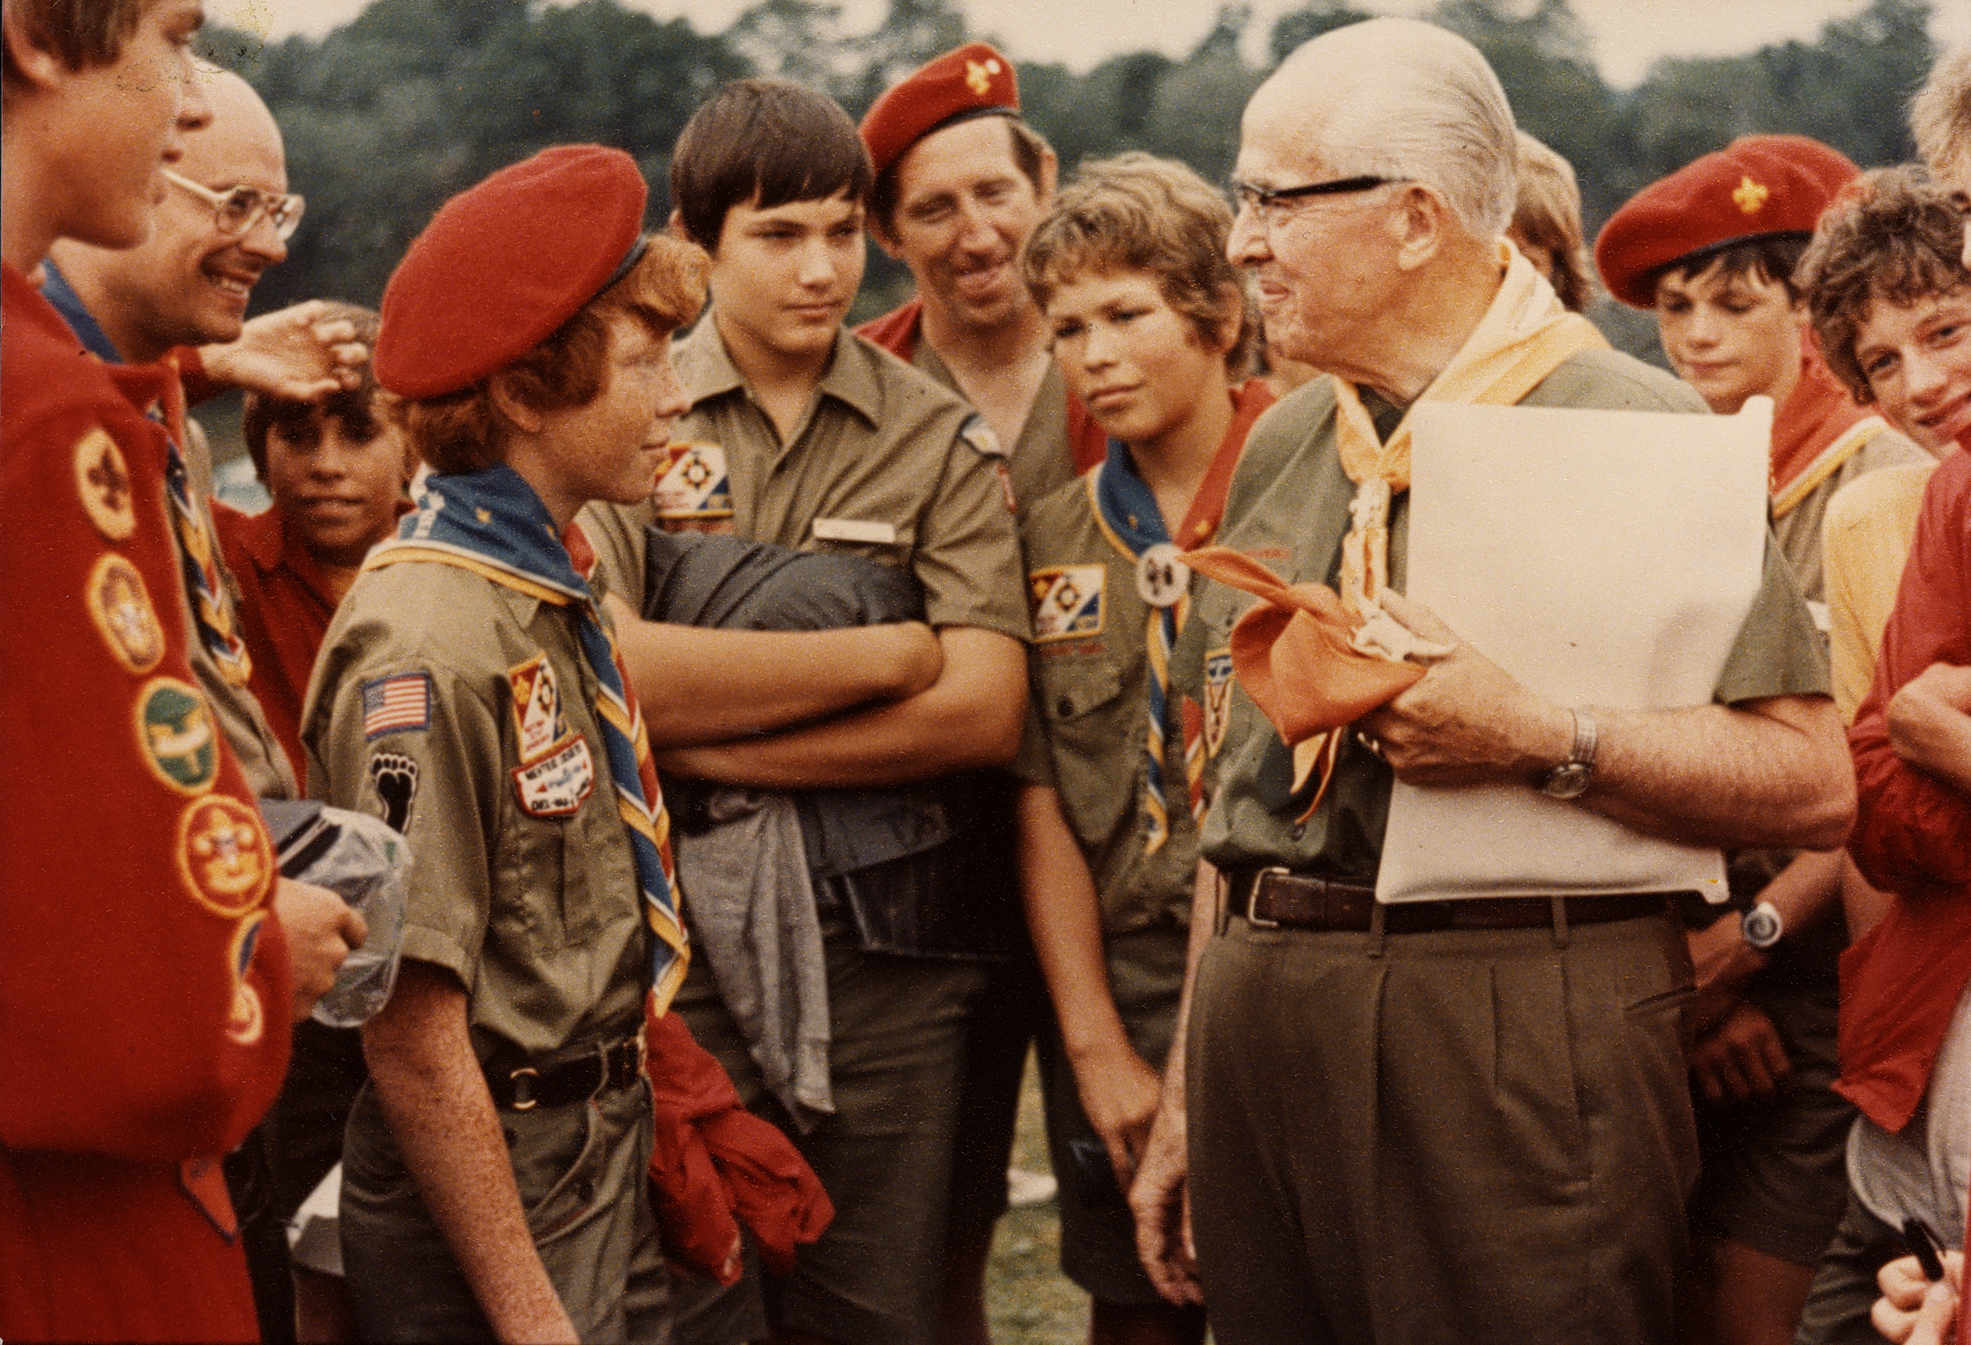 Ezra Taft Benson with Boy Scouts.

Collection includes images of Benson, members of his family, and his activities as member and president of Quorum of Twelve (1943-1985), U.S. Secretary of Agriculture (1953-1961), and President of the Church (1985-1993). Bulk of collection consists of photographs taken while he was in government service

Collection includes print-outs of computerized "index" (inventory) of images prepared by members of Benson's staff. Entry for each of 919 numbered folders lists items in that folder, date(s) of images, and persons or subjects represented